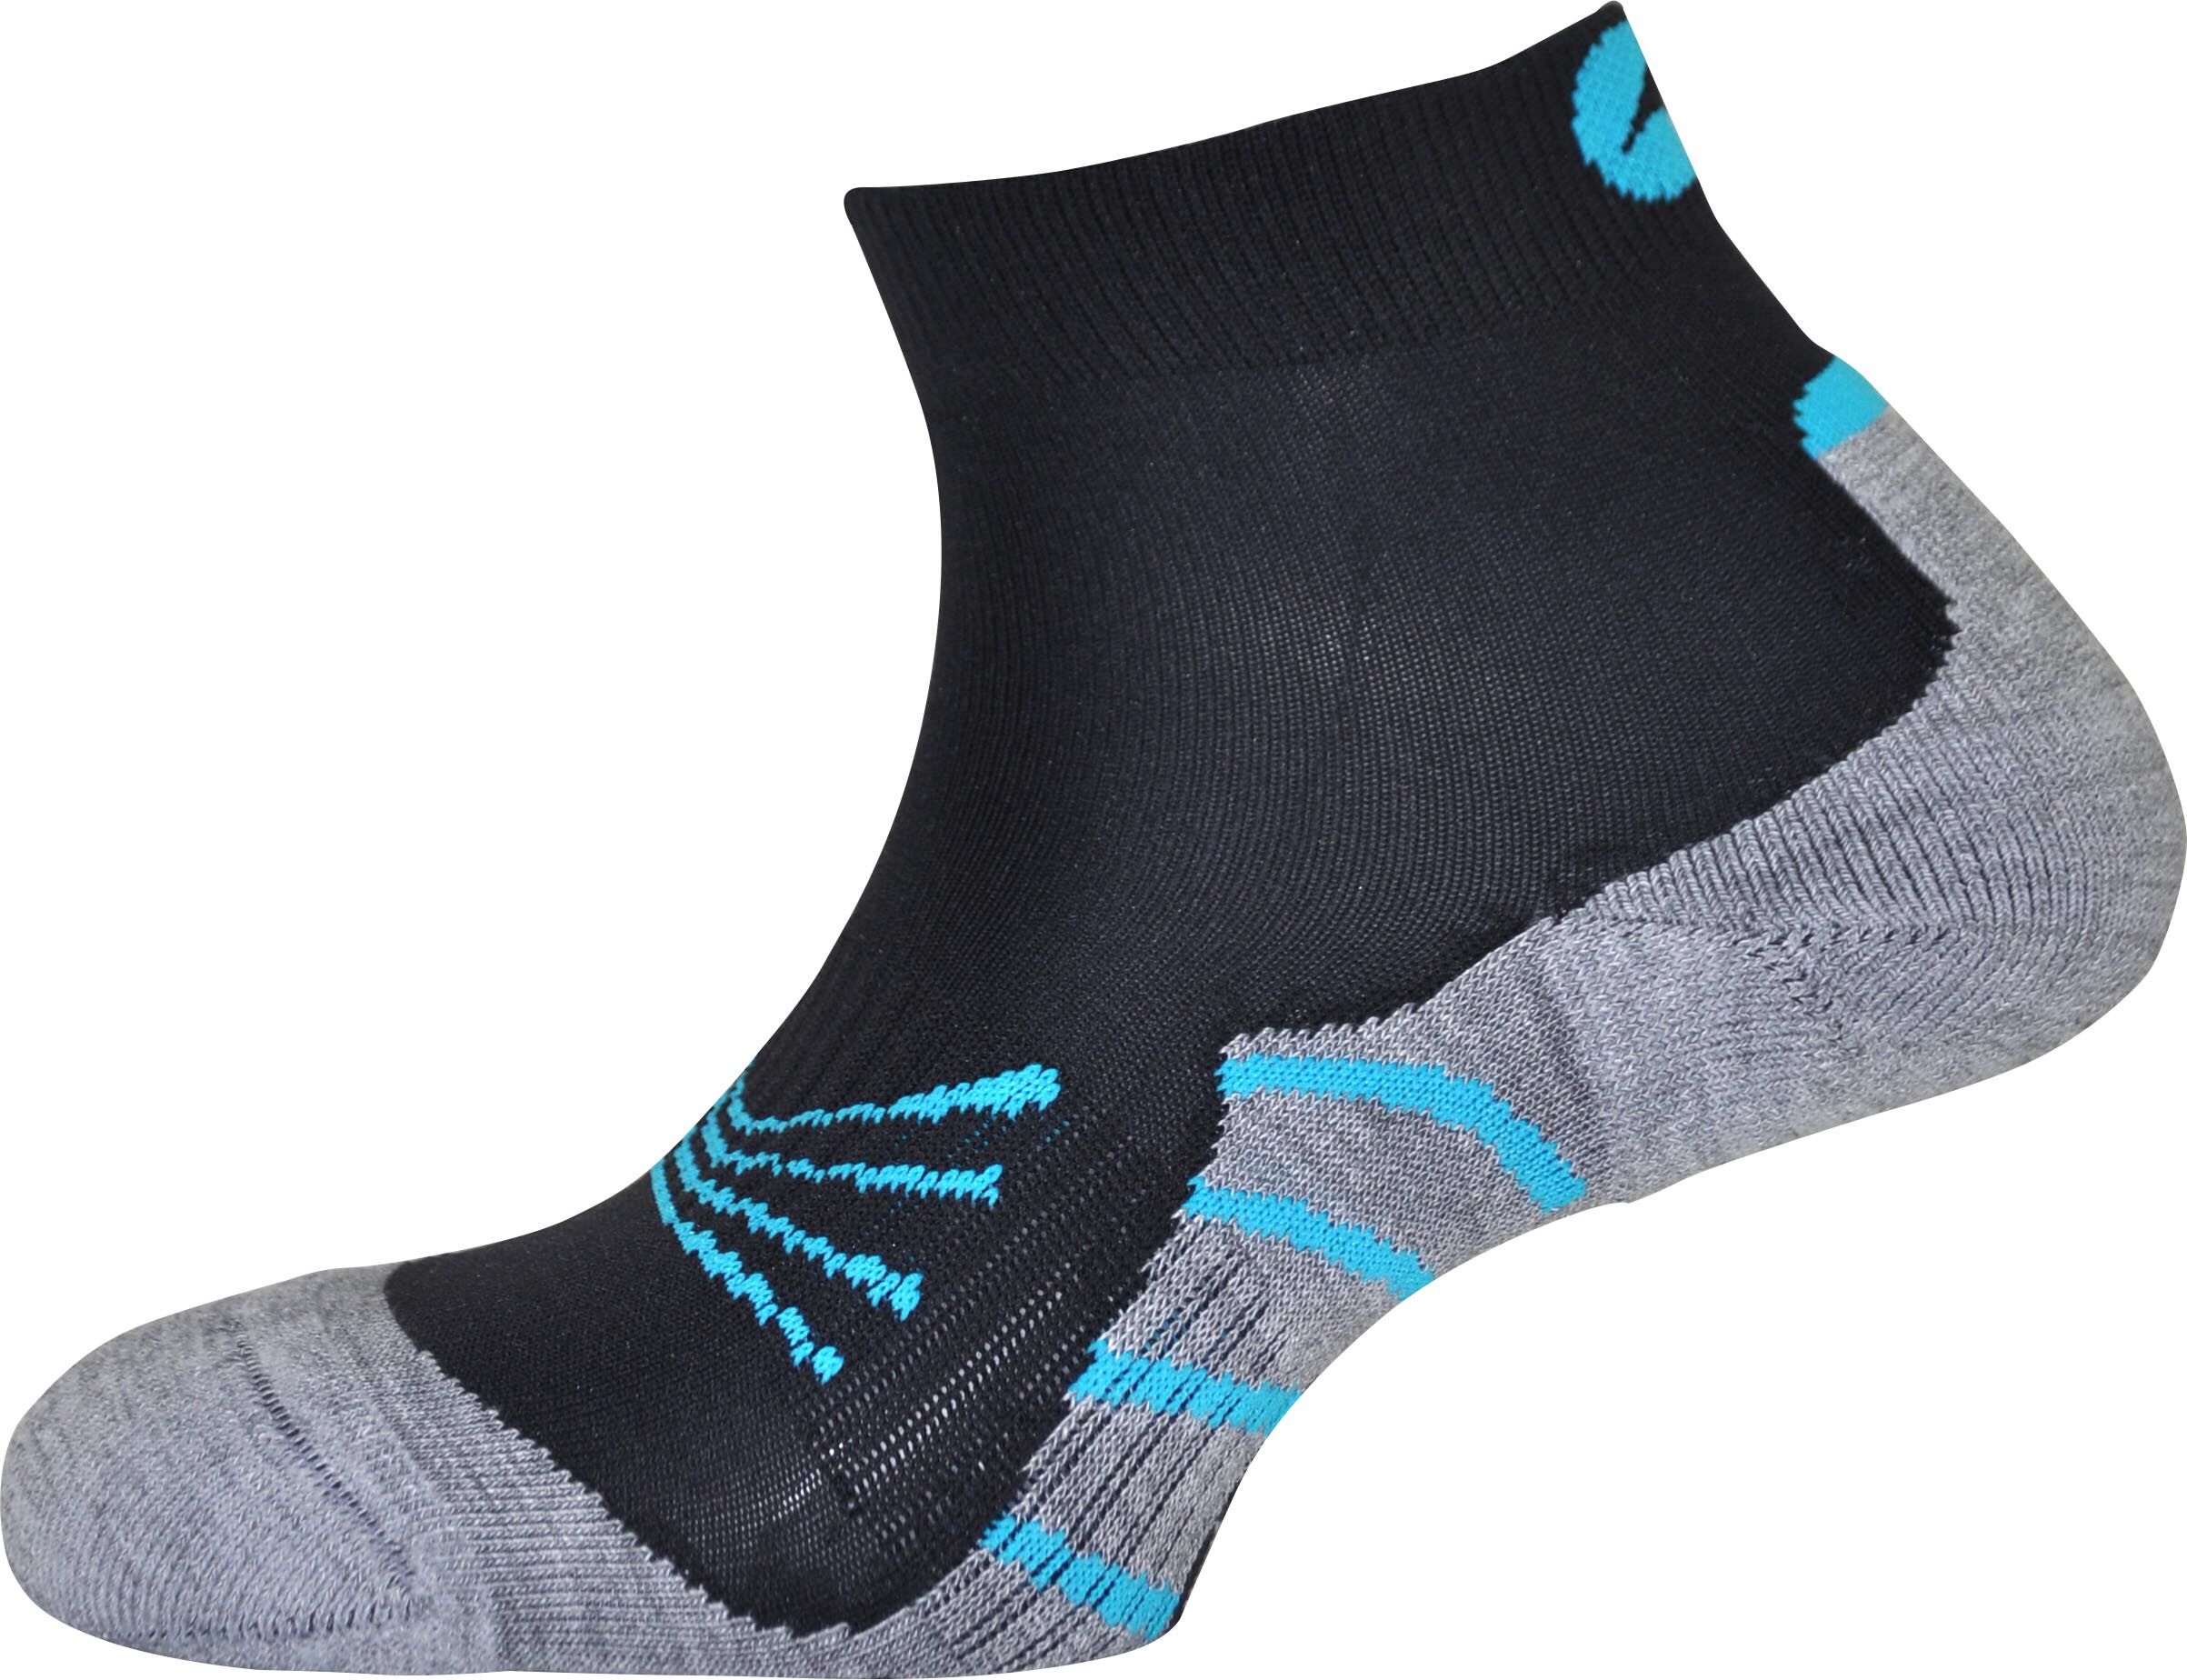 Monnet Trail Perf - Chaussettes running | Hardloop